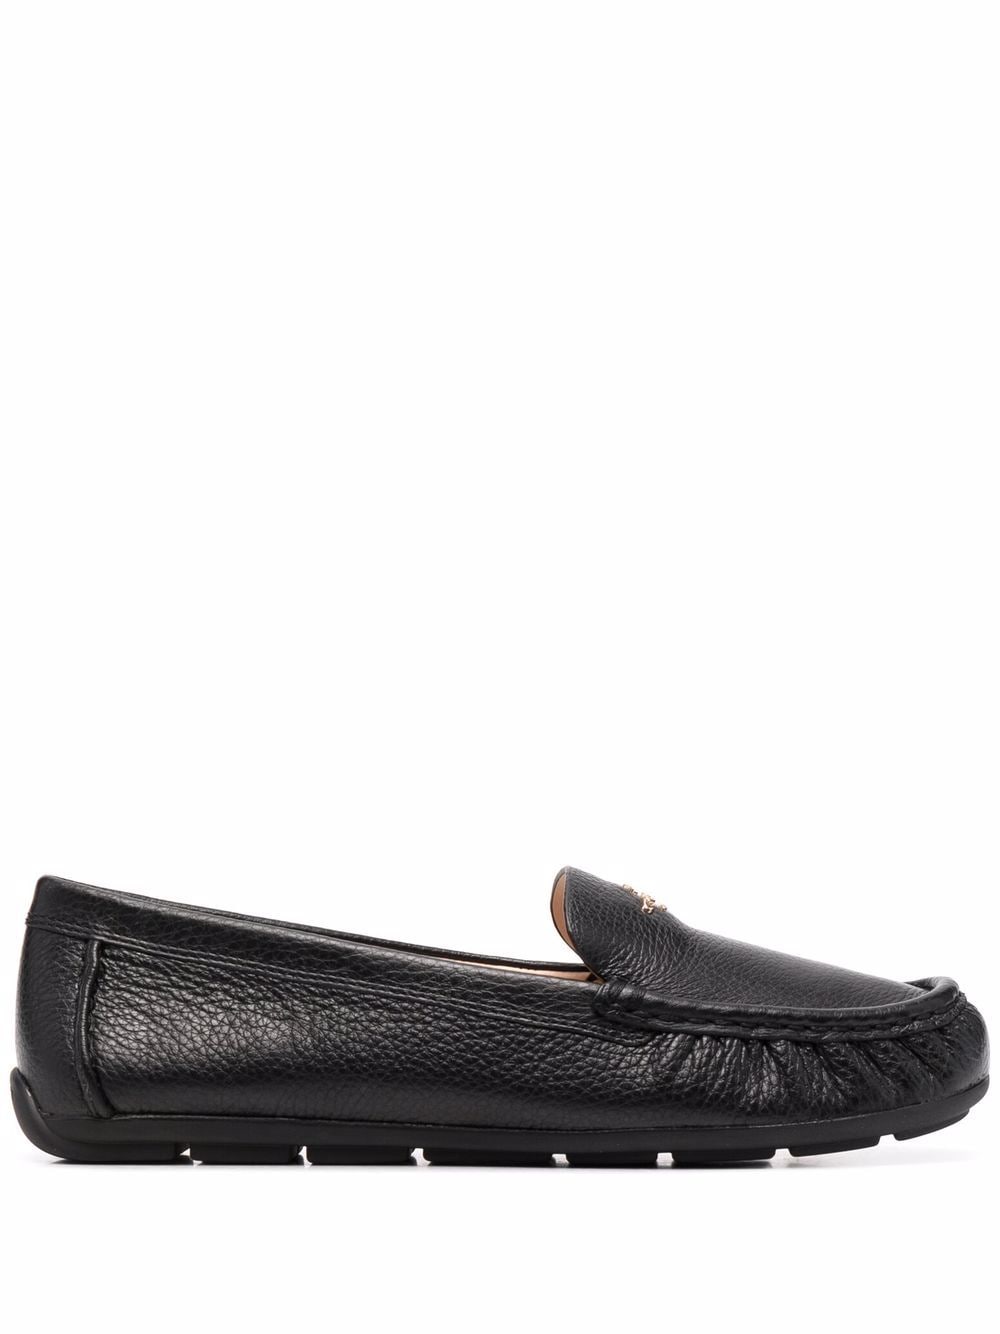 Coach Marley leather driver loafers - Black von Coach